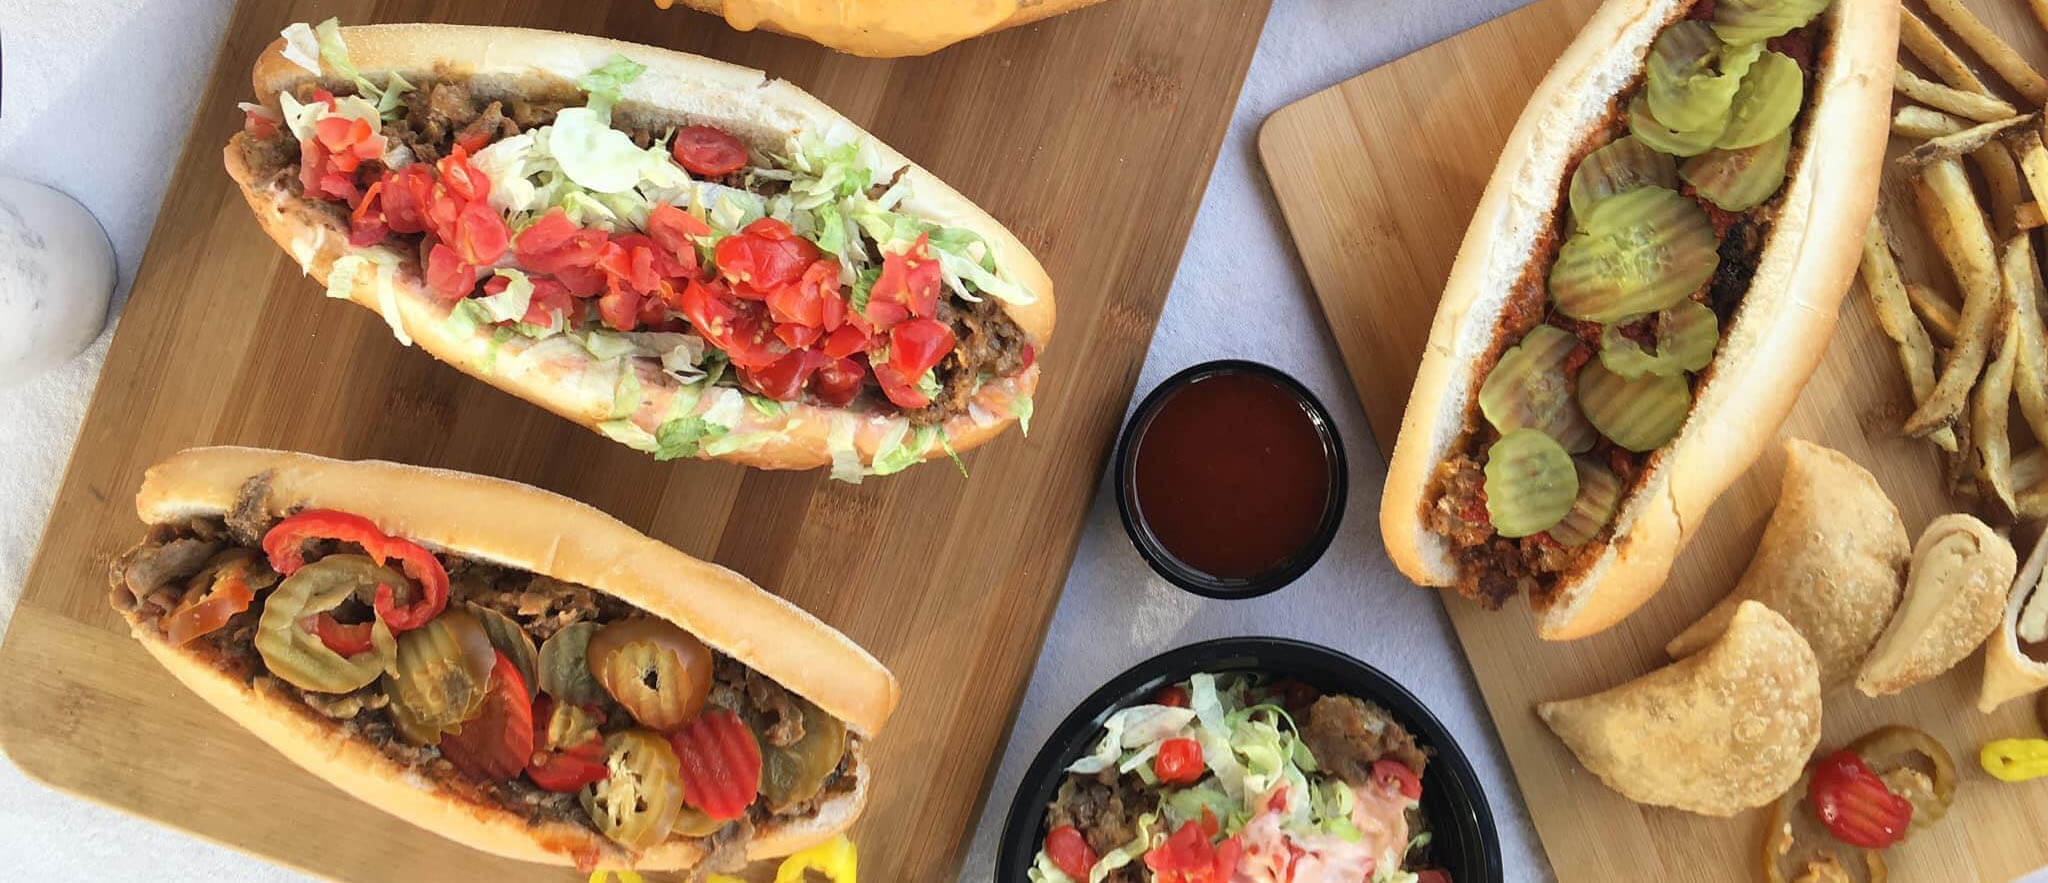 Three cheesesteak sandwiches topped with pickles, lettuce, and tomatoes on wooden cutting boards with french fries on the side